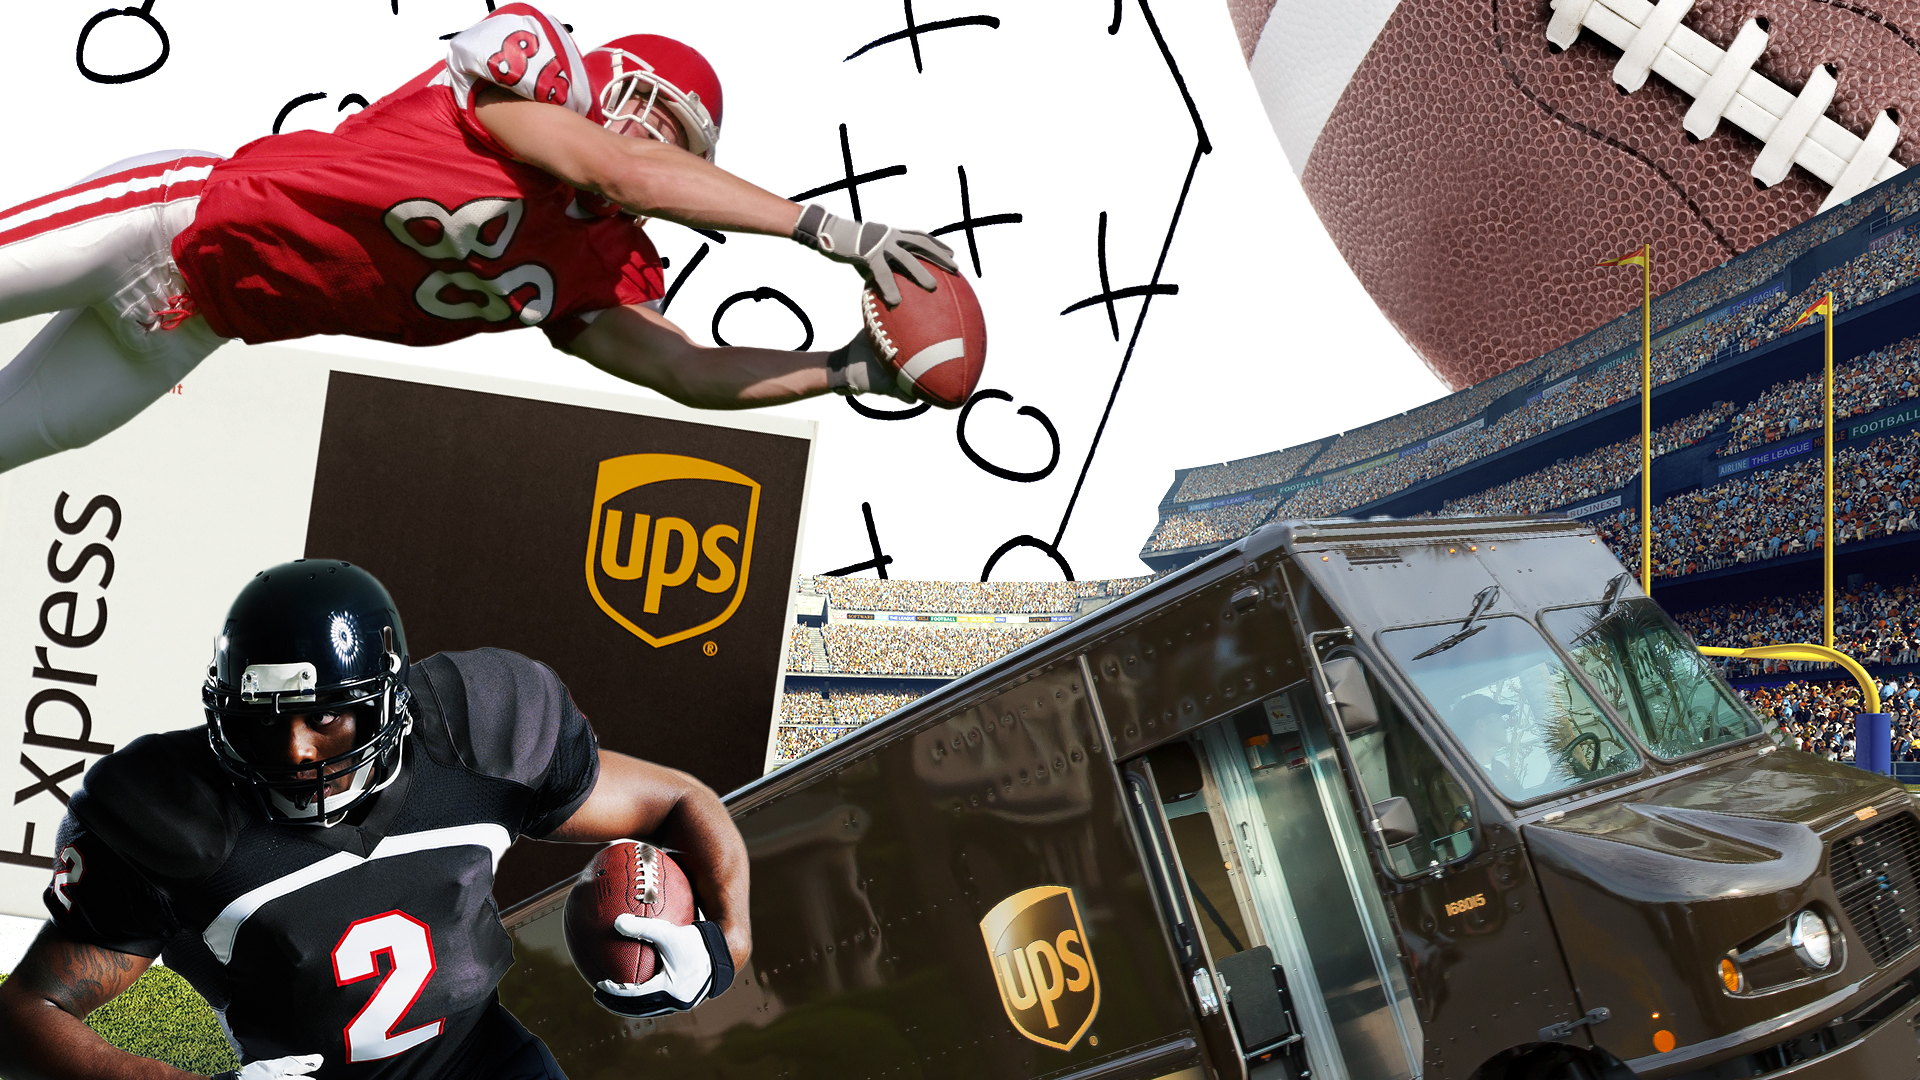 Collage featuring UPS trucks, footballs, sports stadiums and tailgating essentials